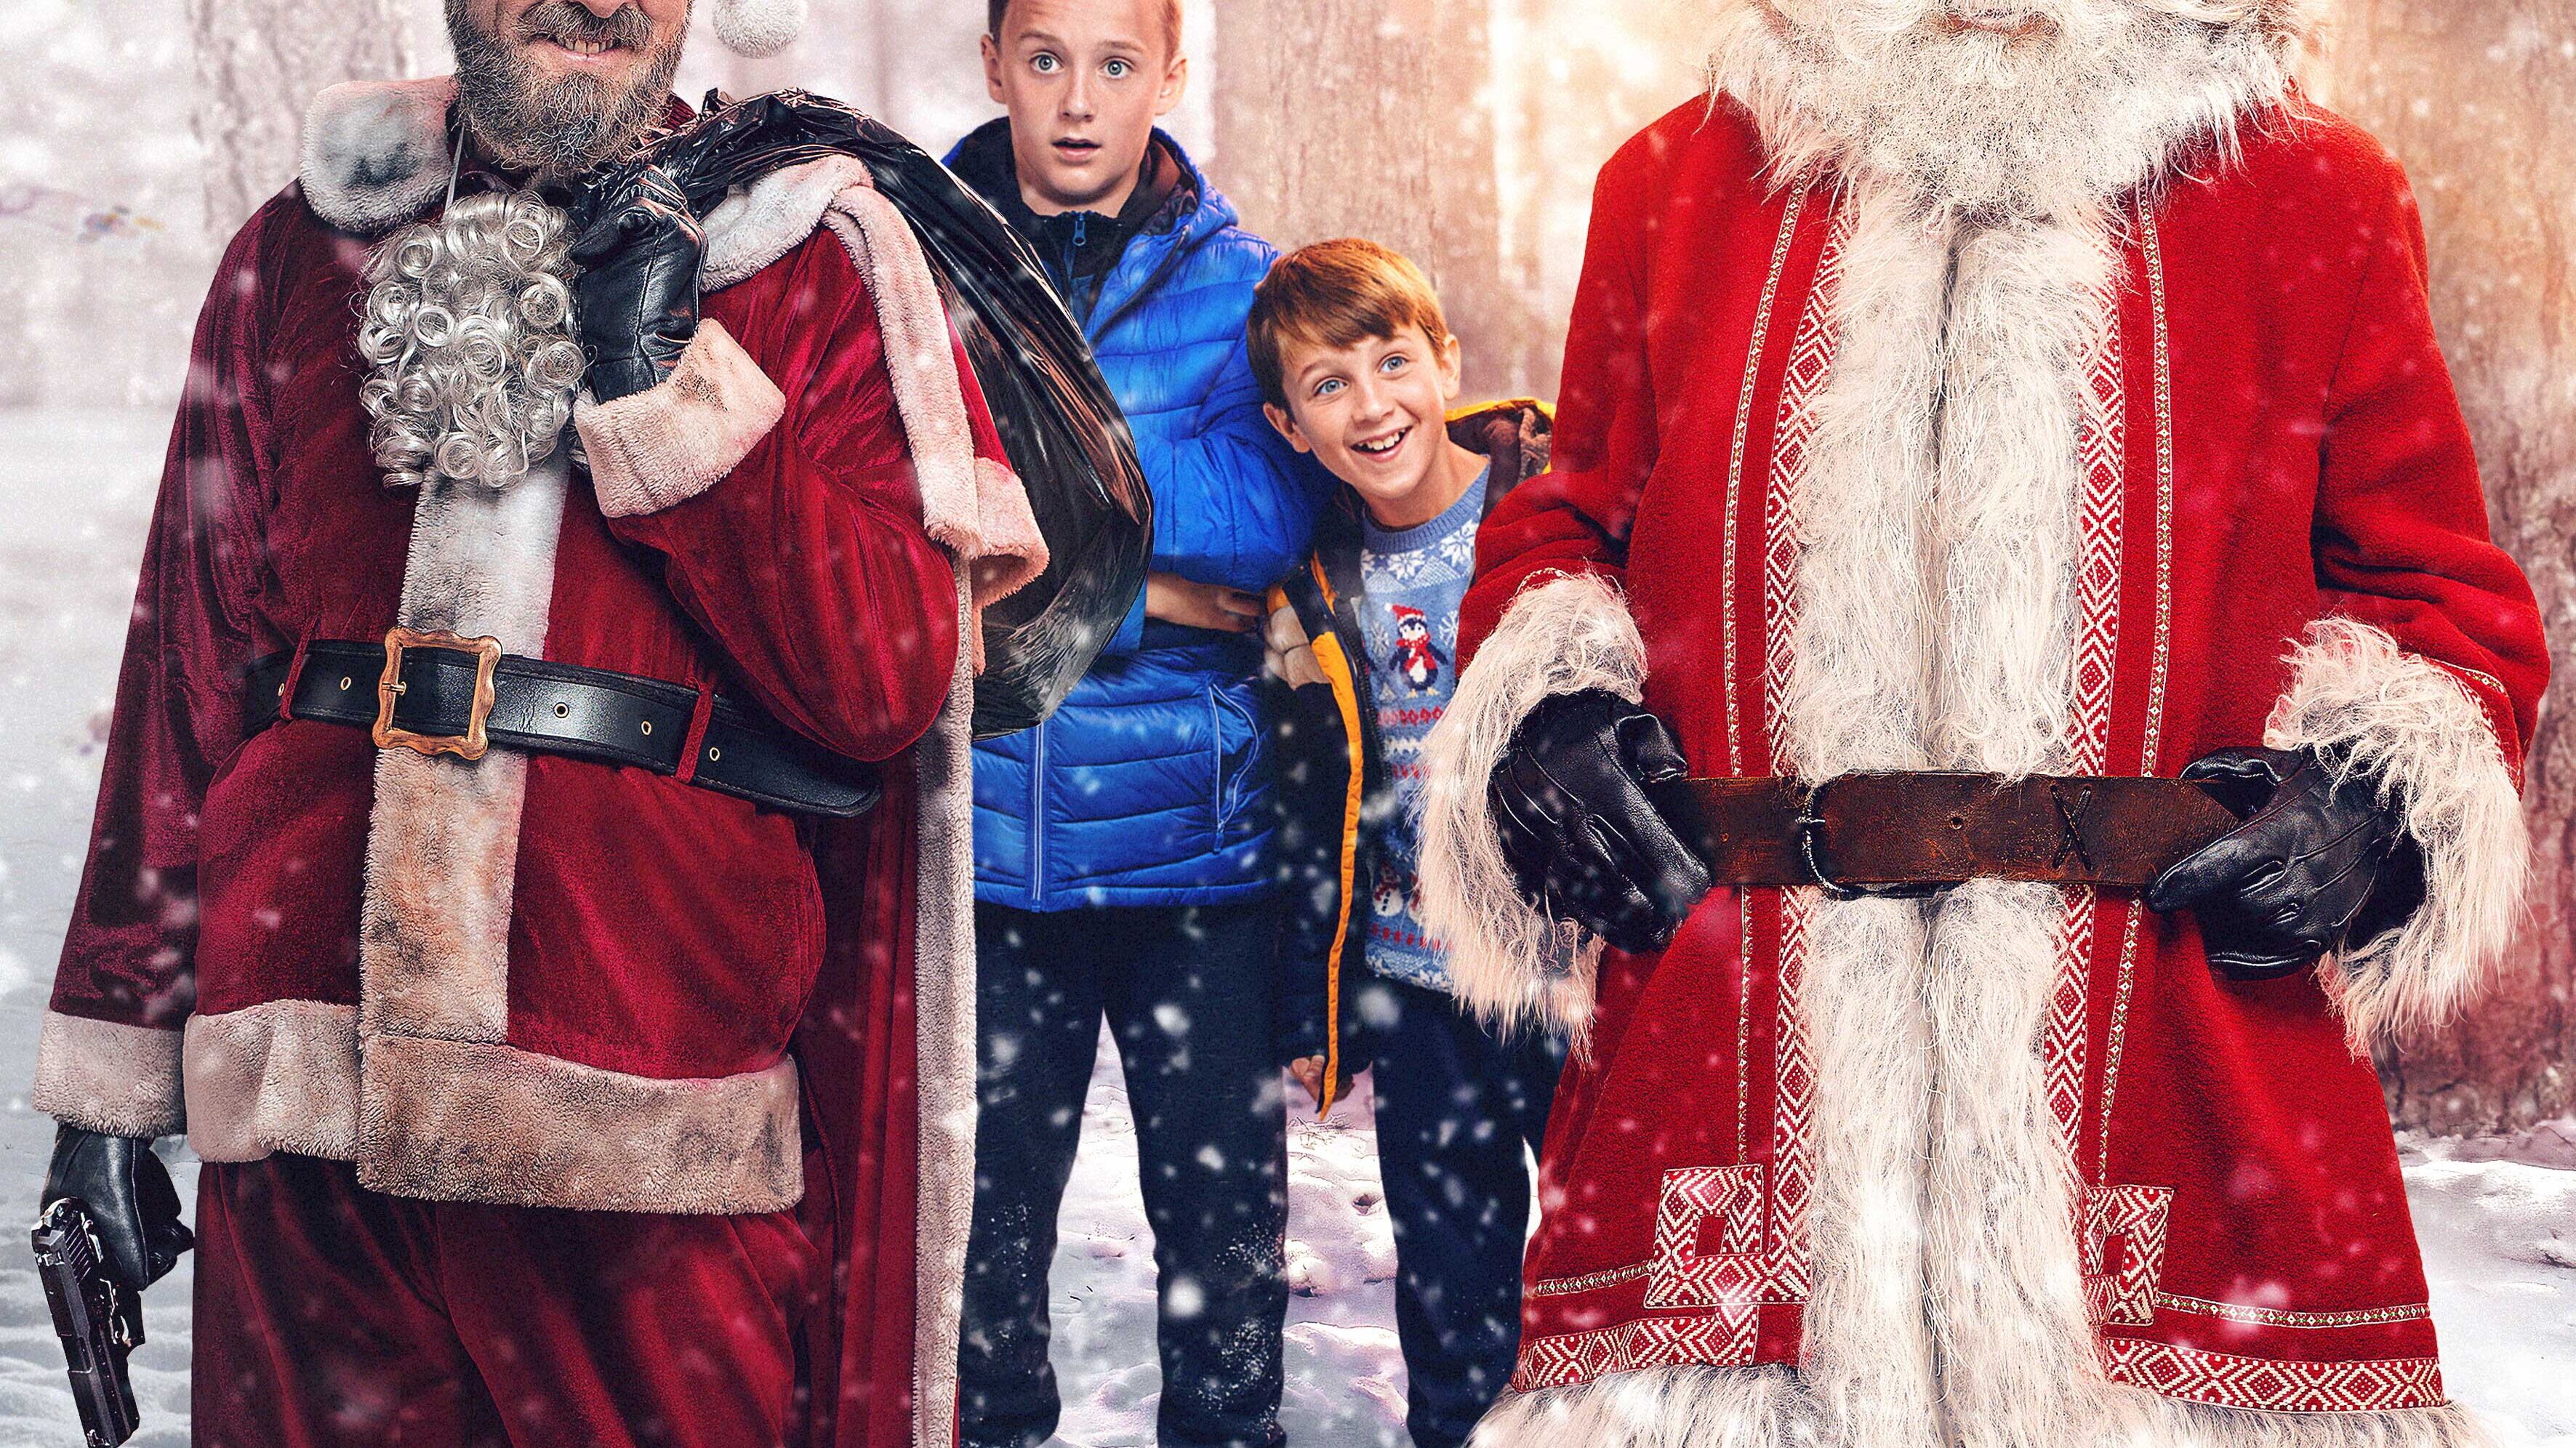 In The Heist Before Christmas 12-year-old Mikey finds two Santa Clauses in the woods. One has just robbed a bank (James Nesbitt), the other Santa (Timothy Spall) claims to have fallen out of his sleigh.